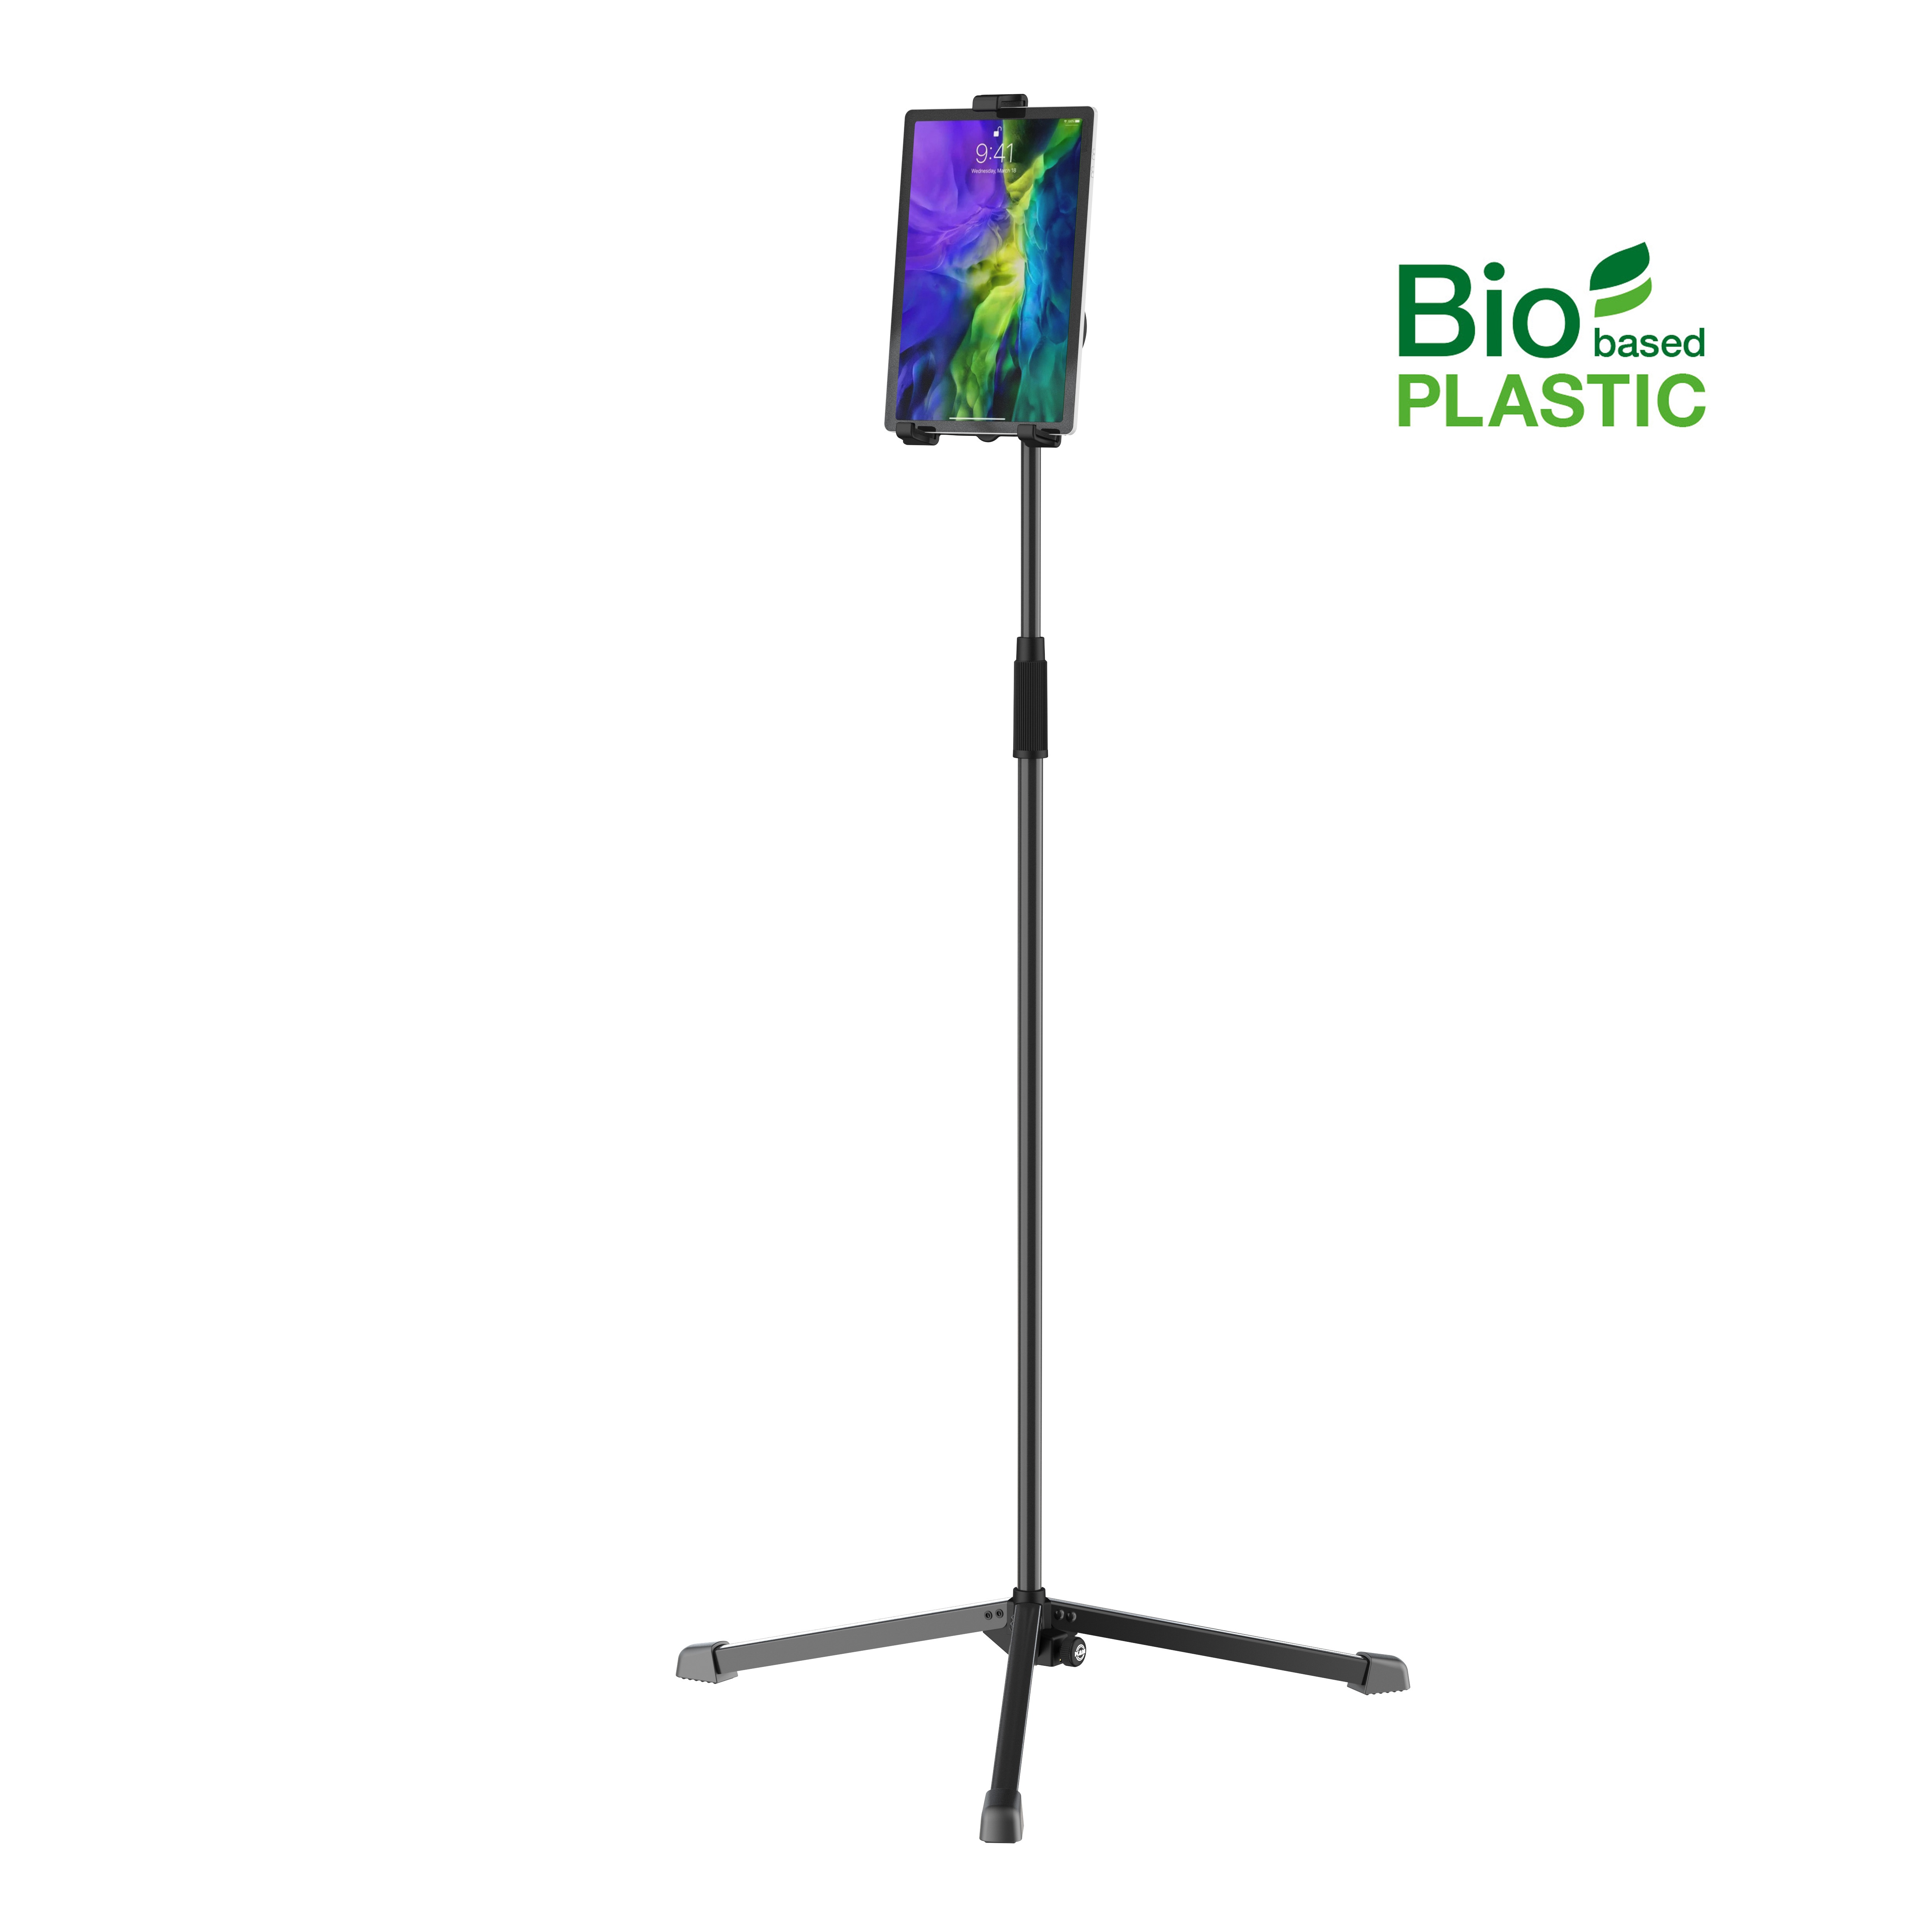 19767 Tablet PC stand "Biobased